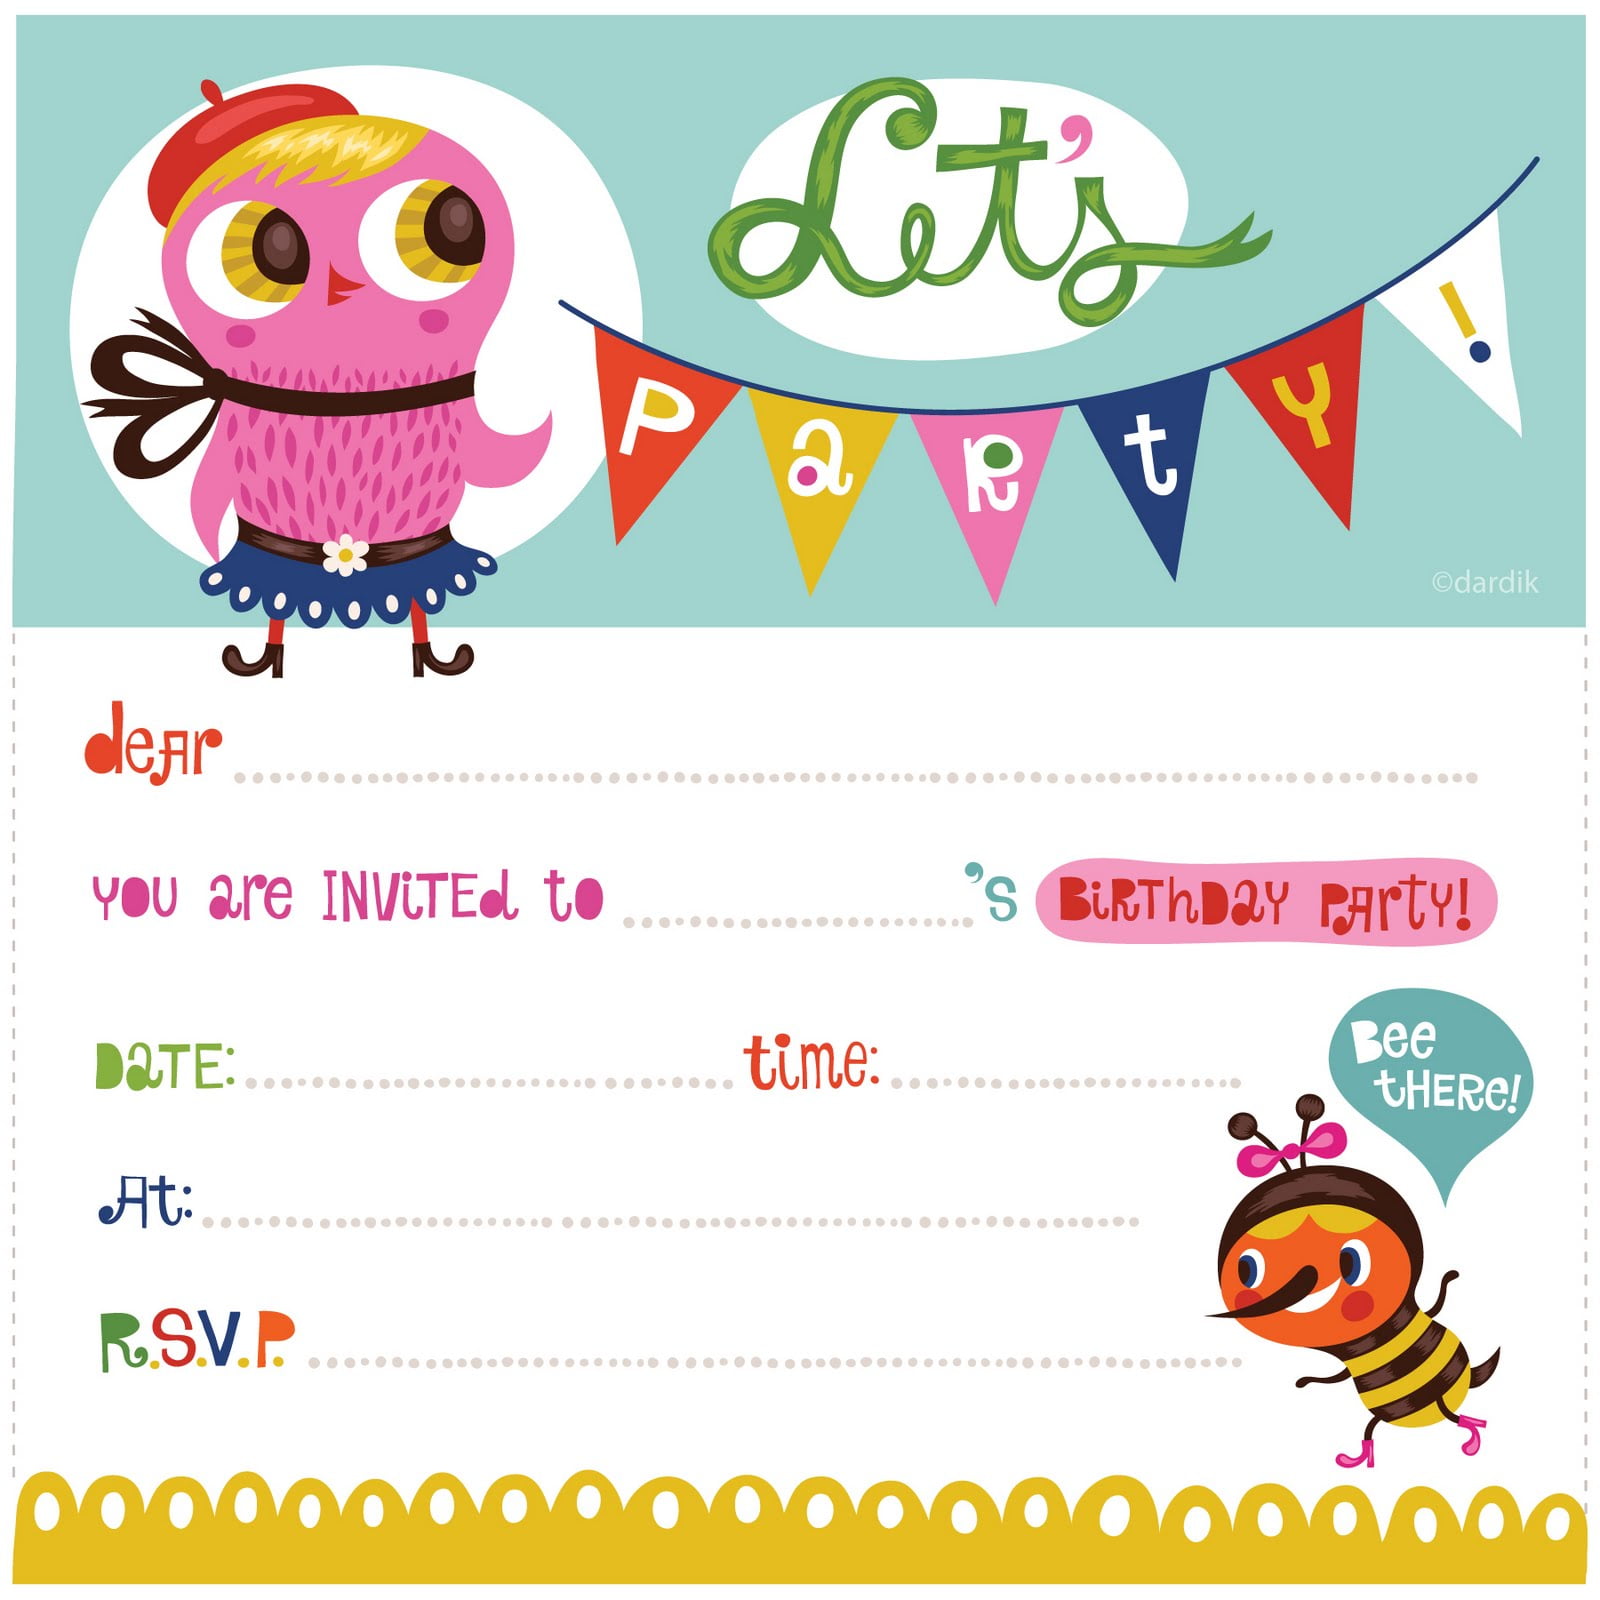 Germanynews02 Download 34 Invitation For Birthday Party Templates